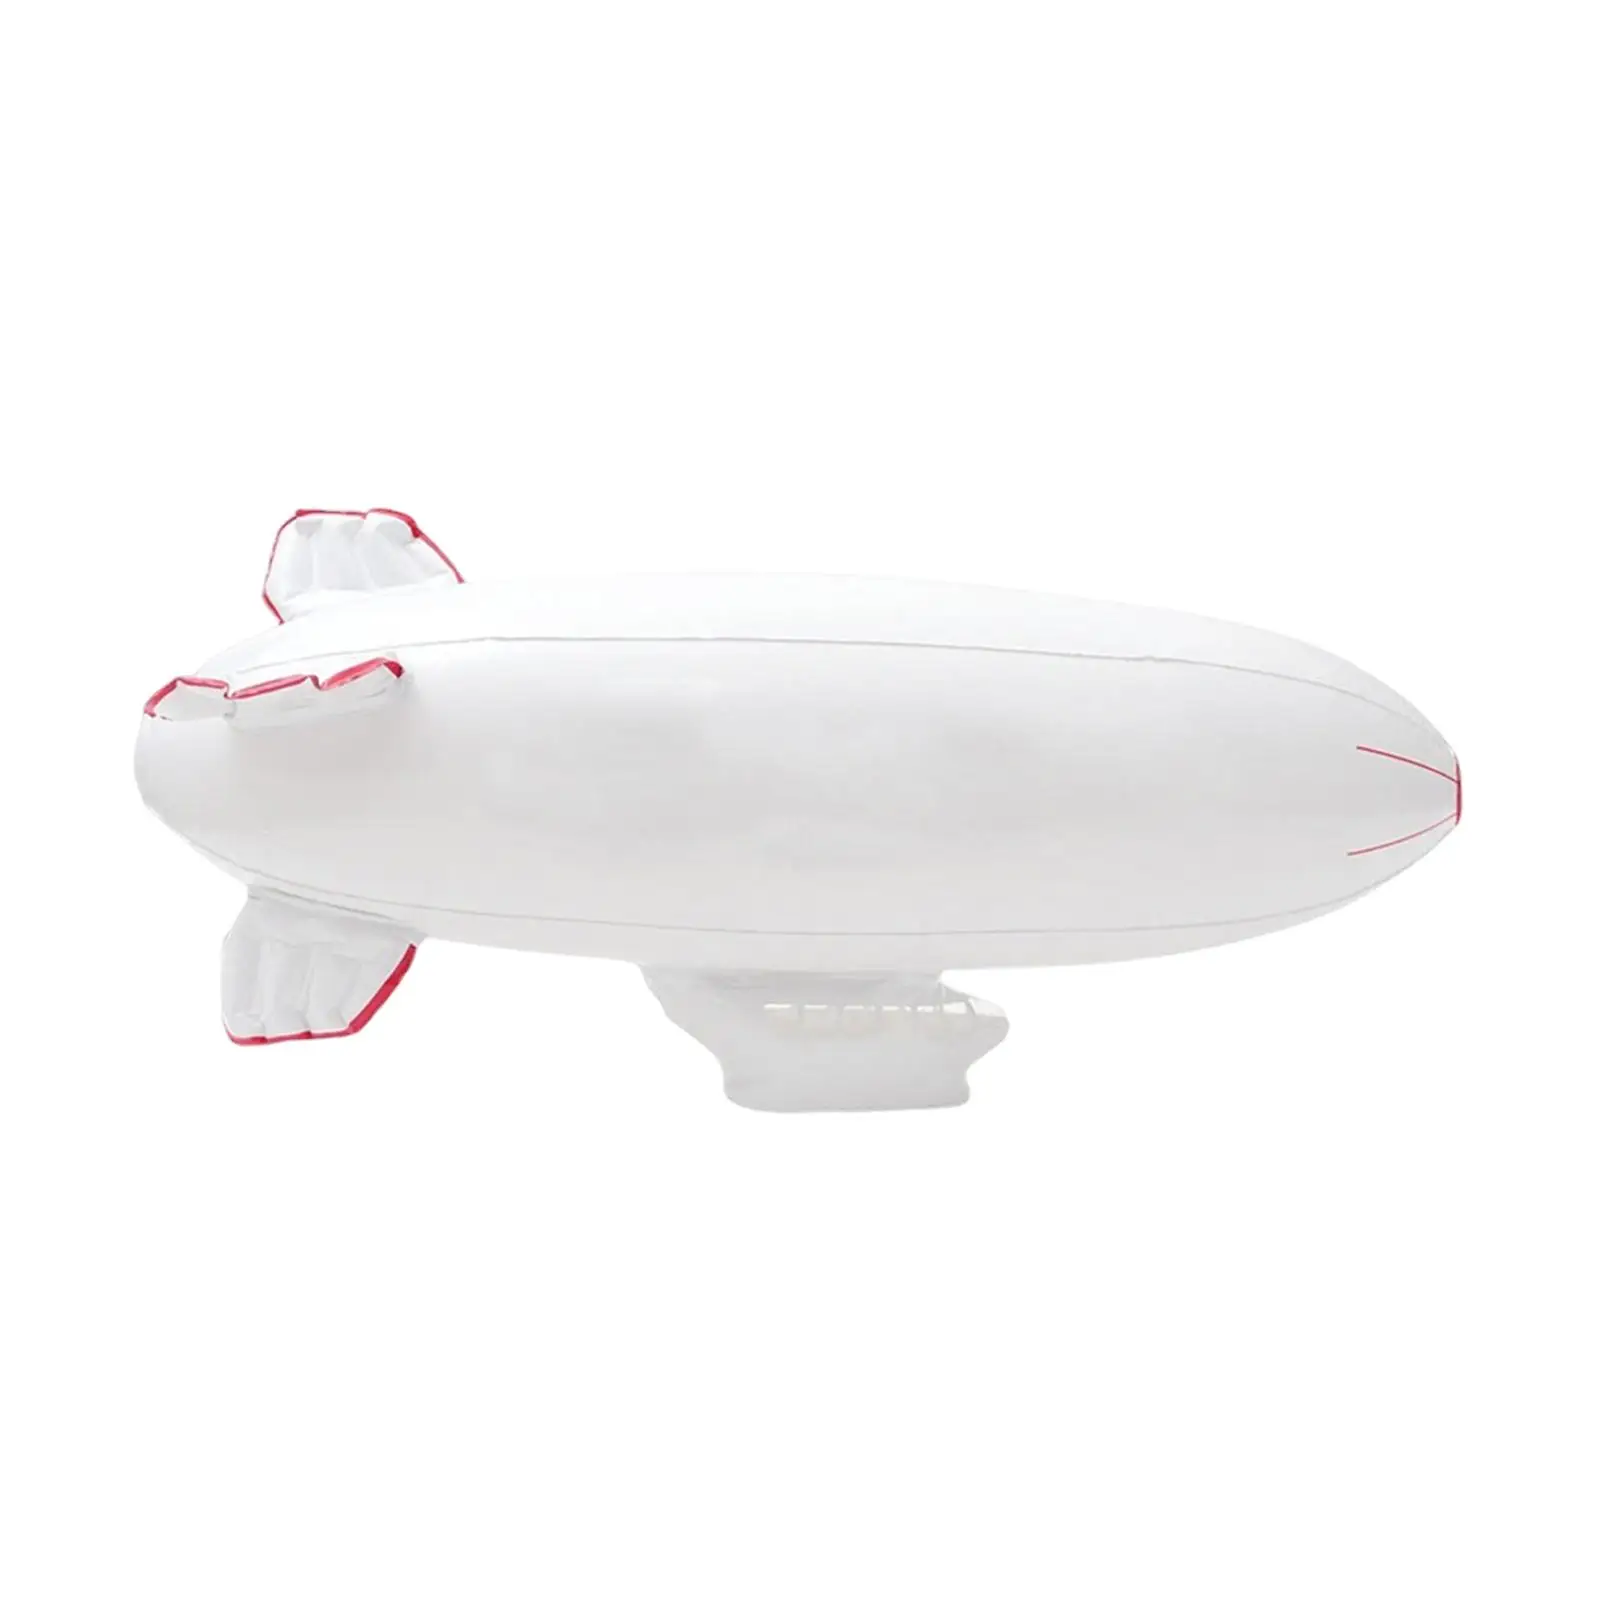 Inflatable Airship Model Save space Unique Aerodynamic Design Airplane Model Hanging for Party Wedding Birthday Ornaments